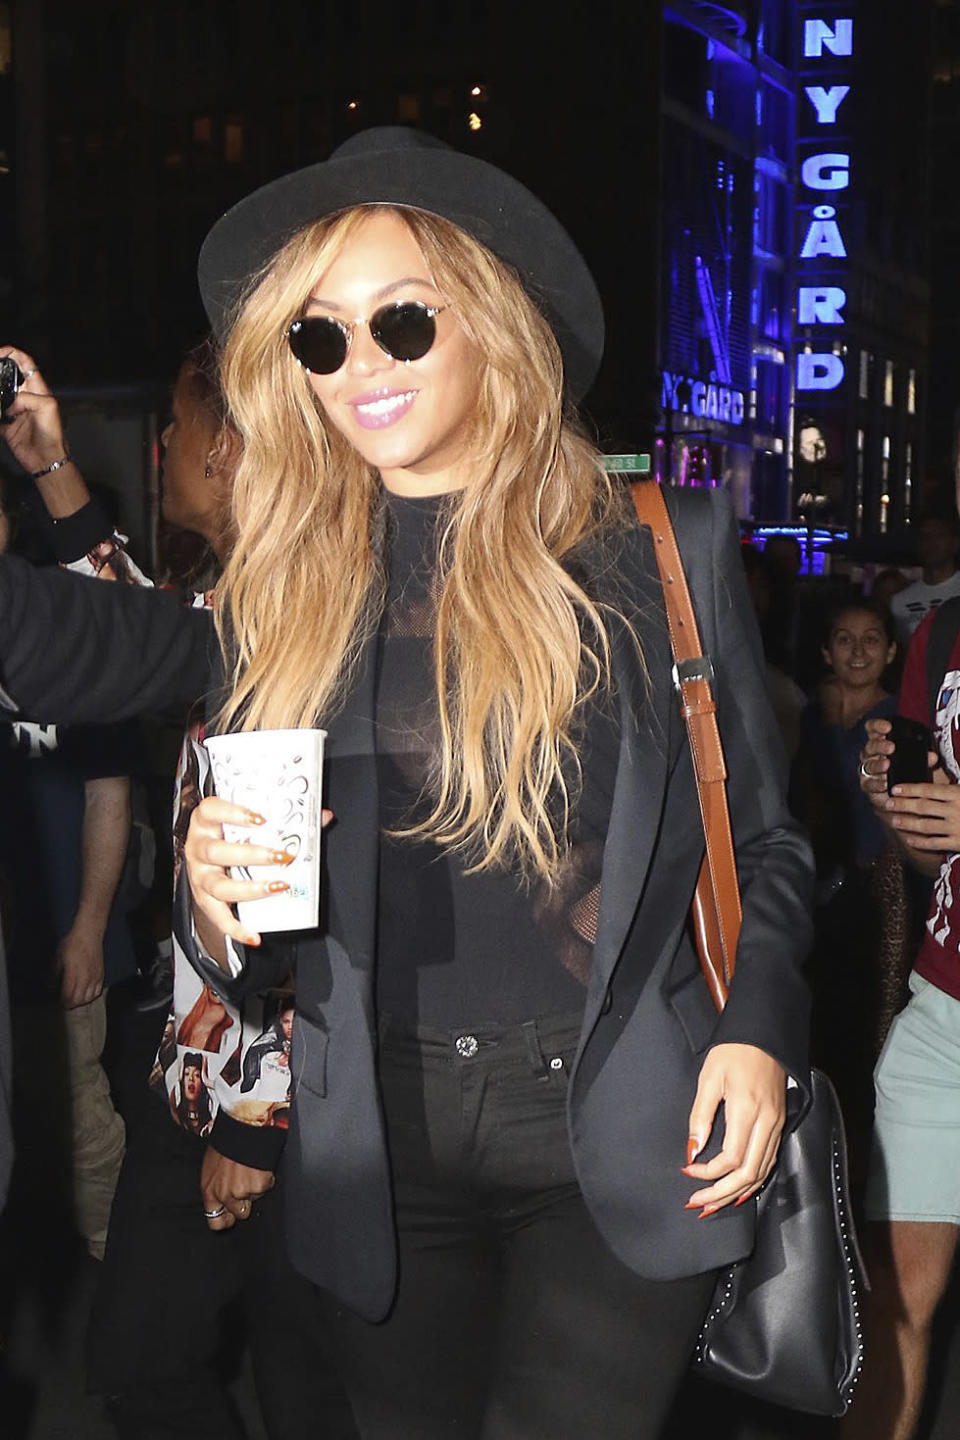 Beyonce wearing all black for a night out in New York City.